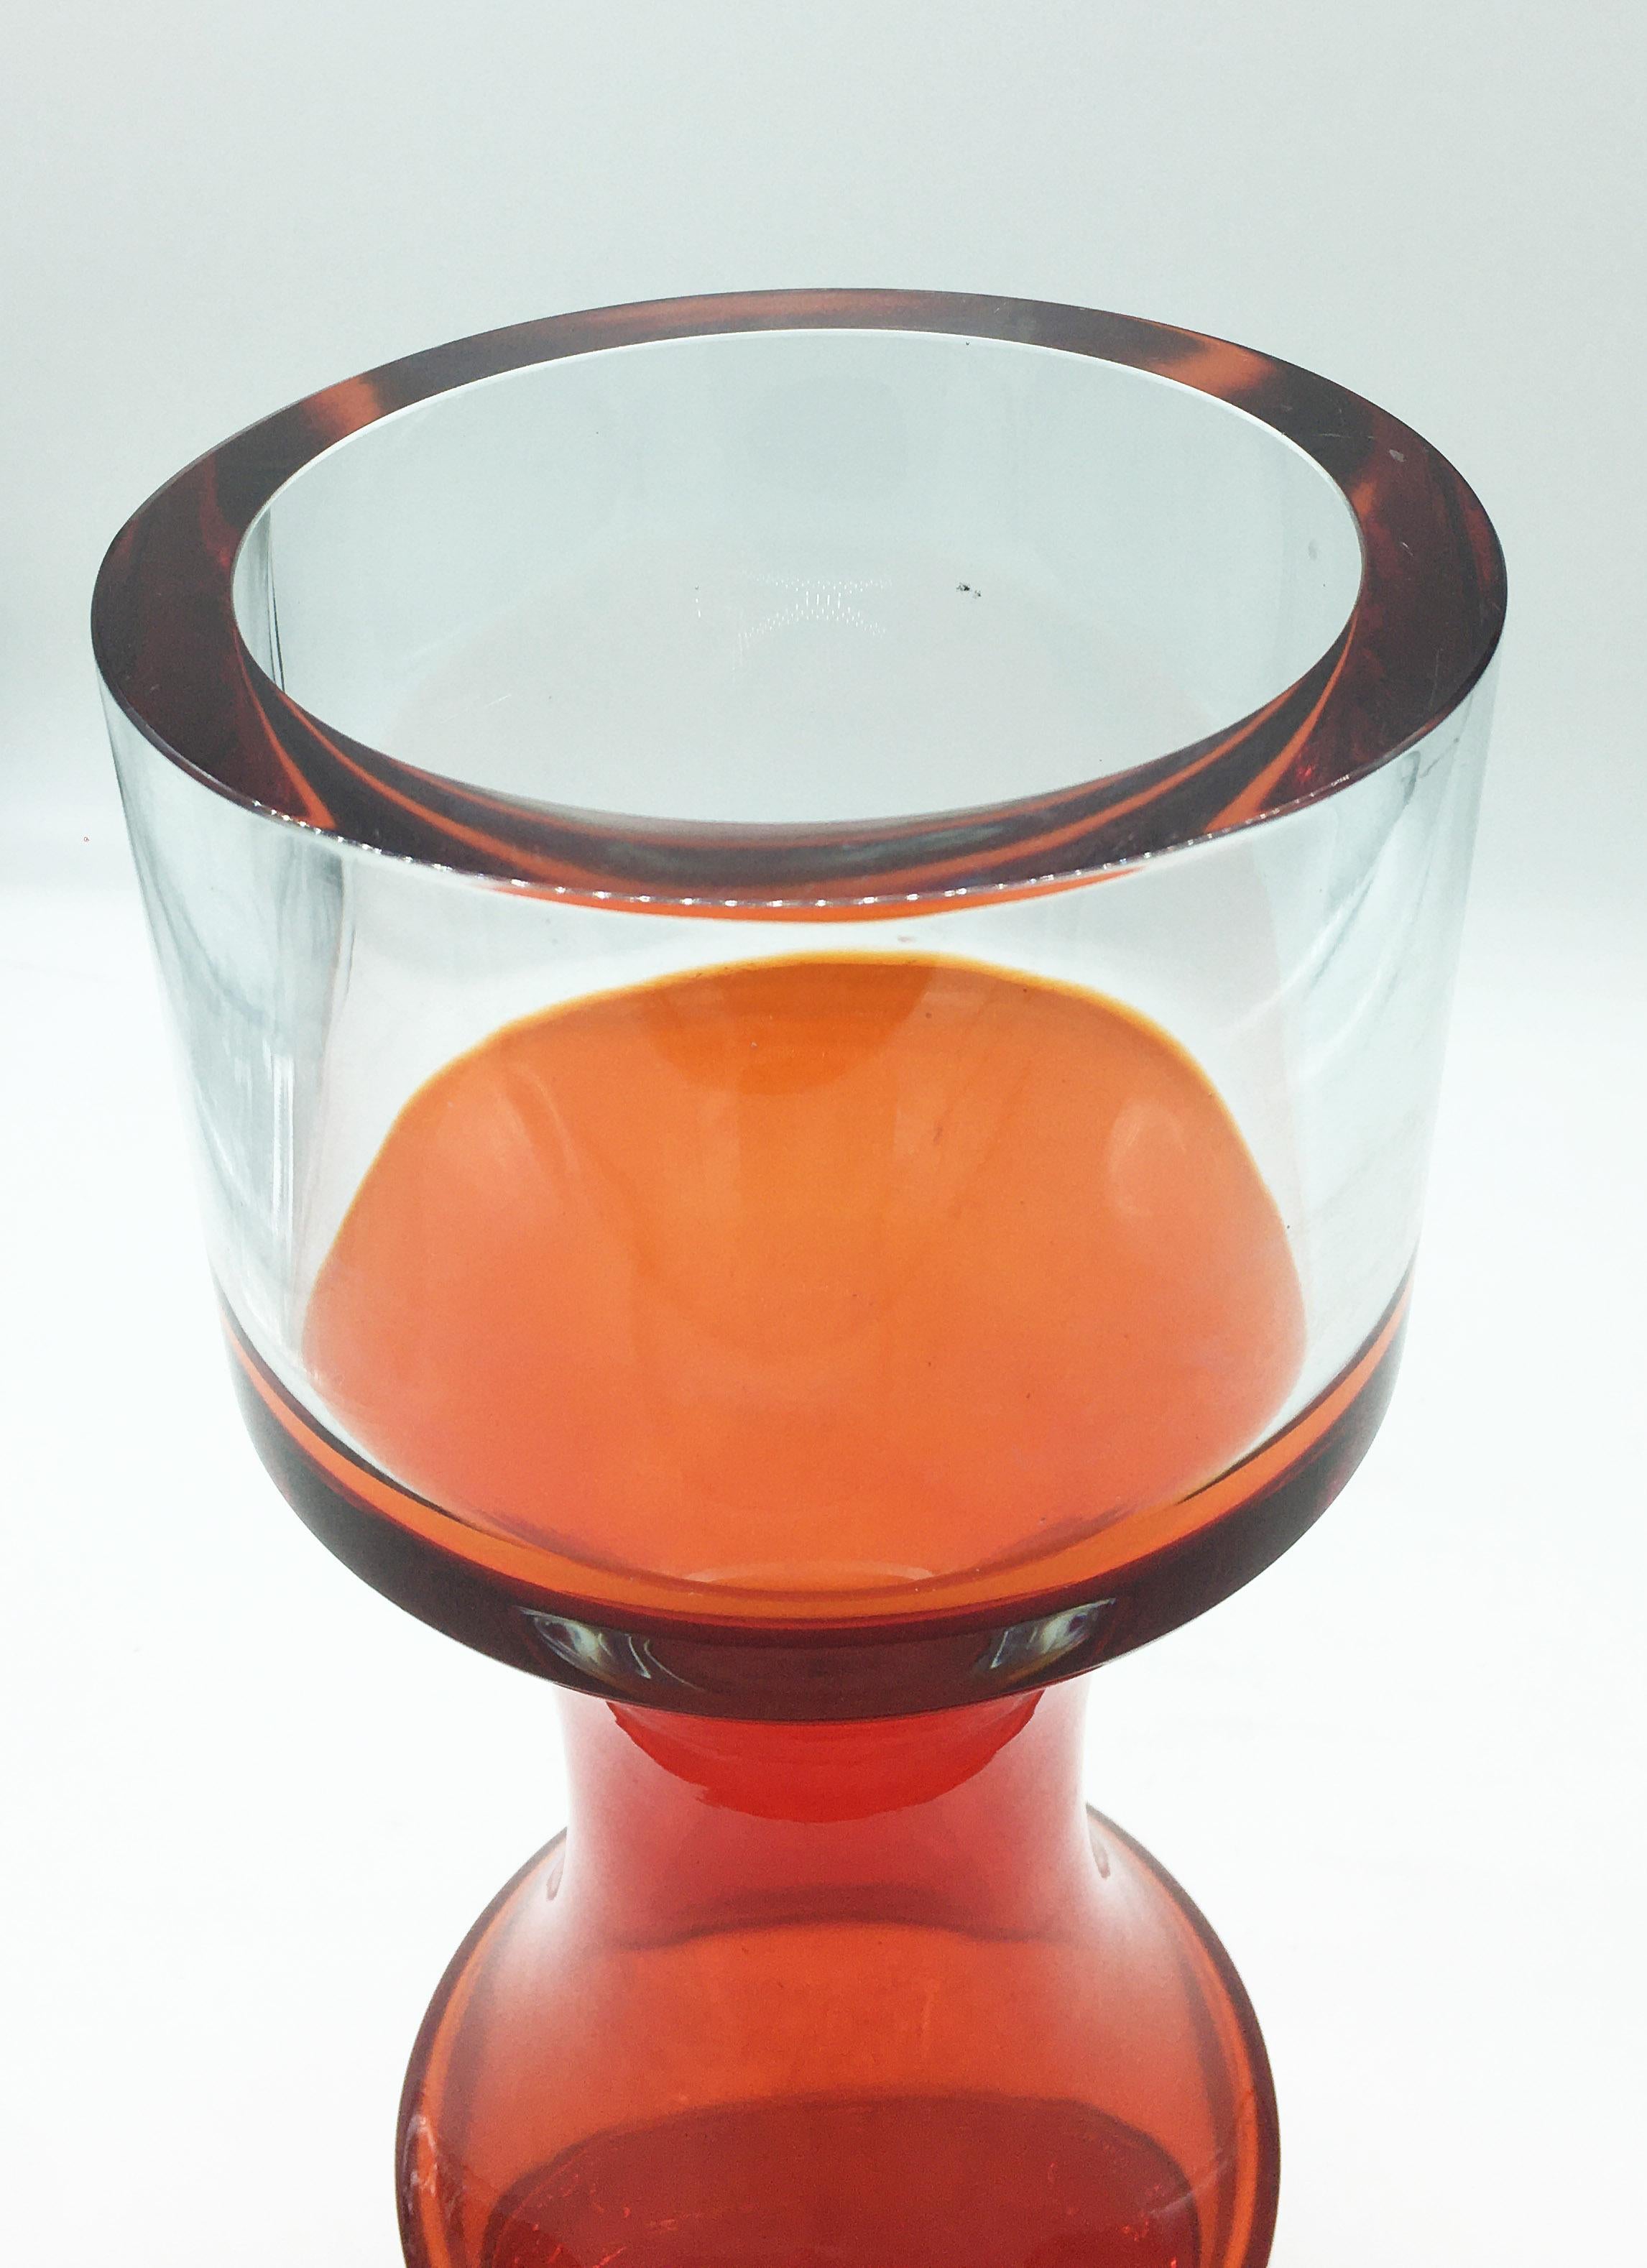 Beautiful and rare large orange Murano vase manufactured in Italy in 1970s.
Perfect vintage condition.